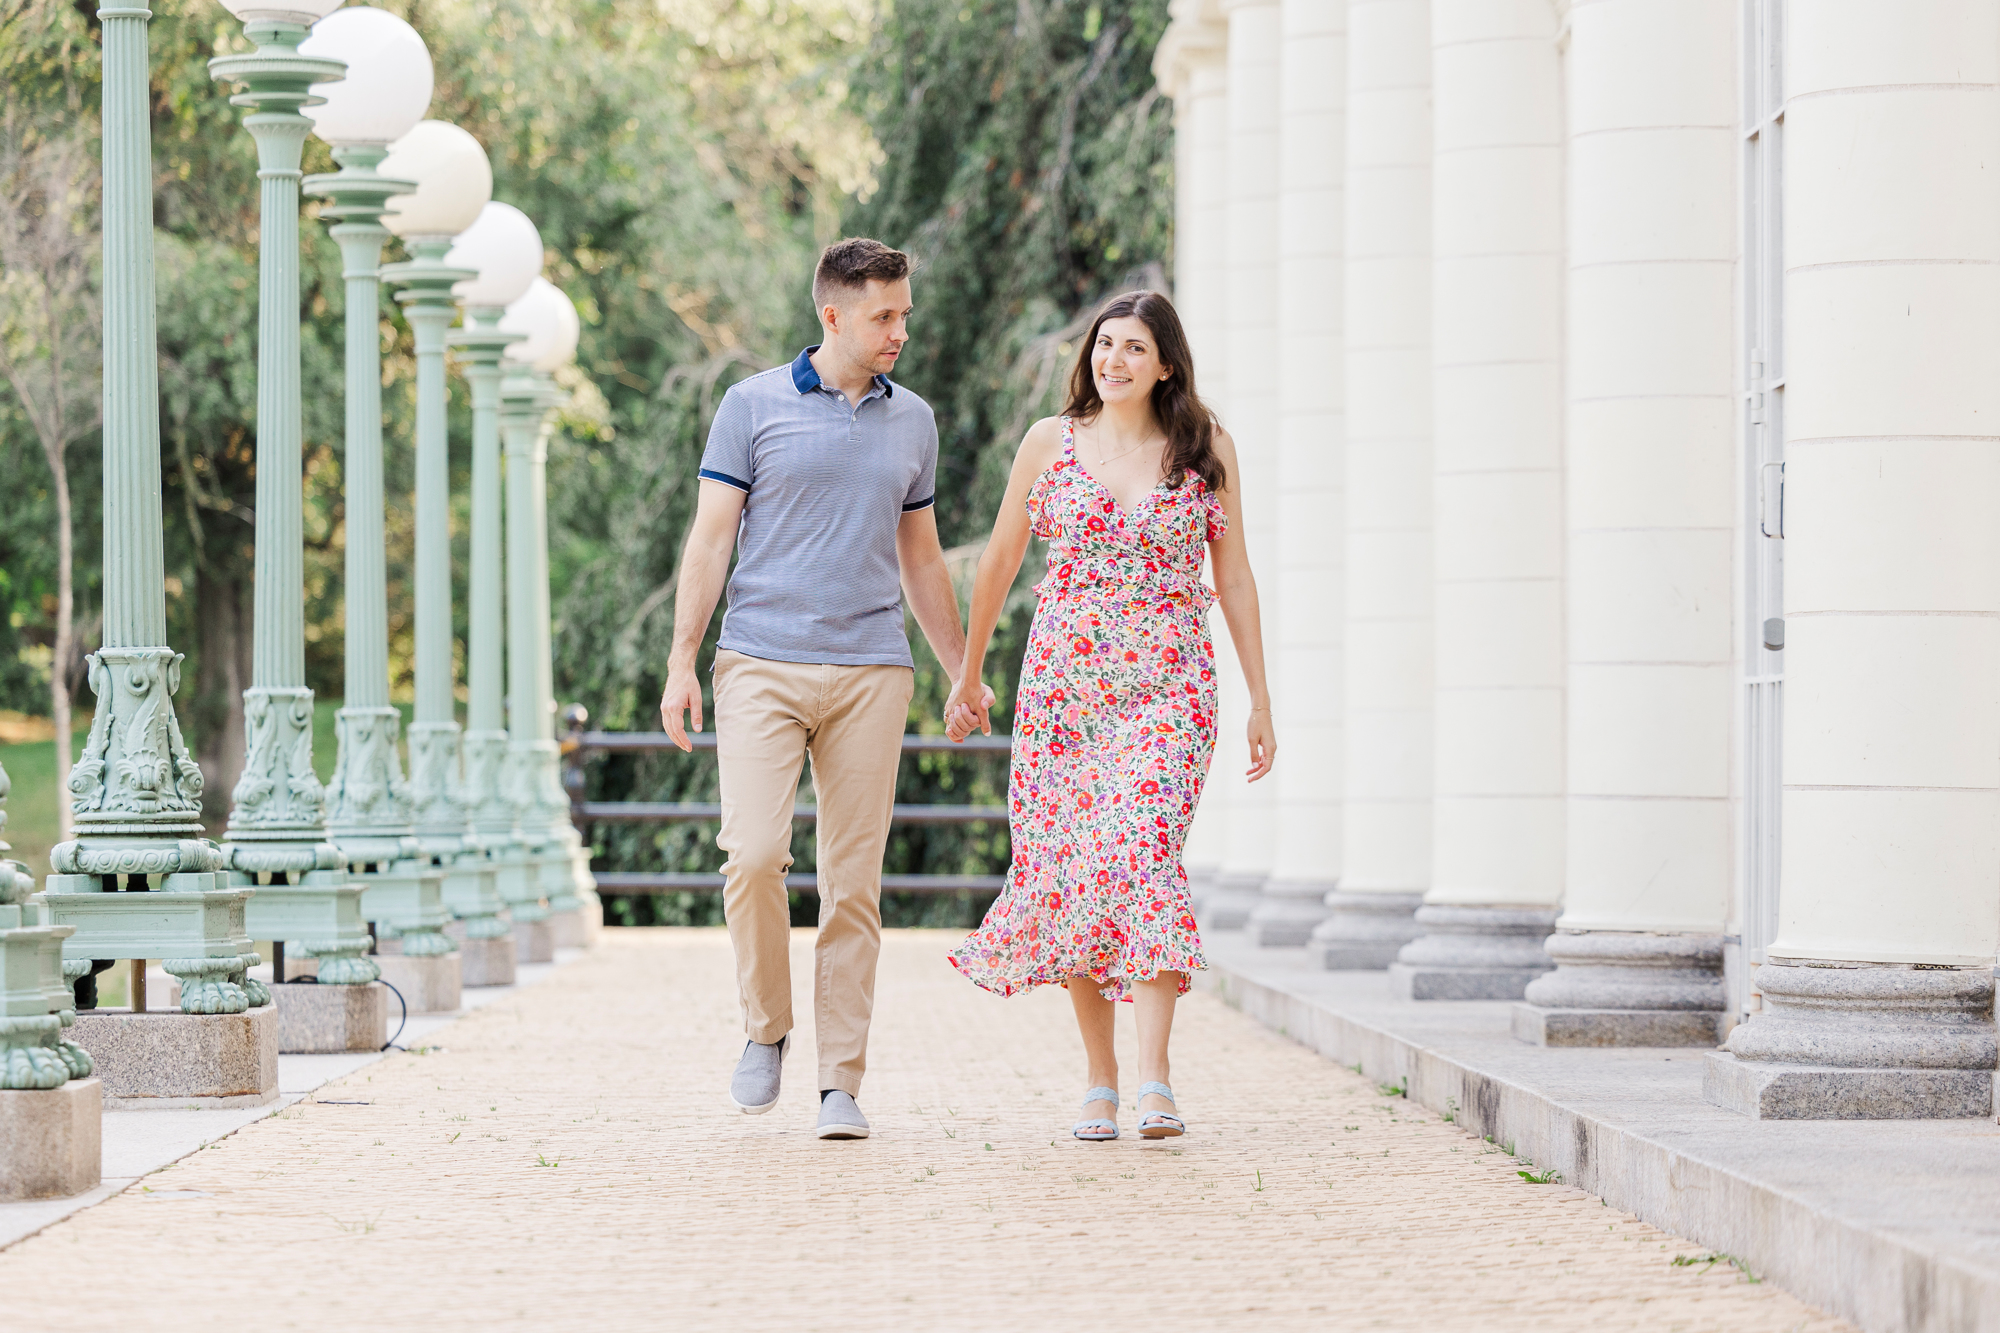 Authentic engagement session in Prospect Park